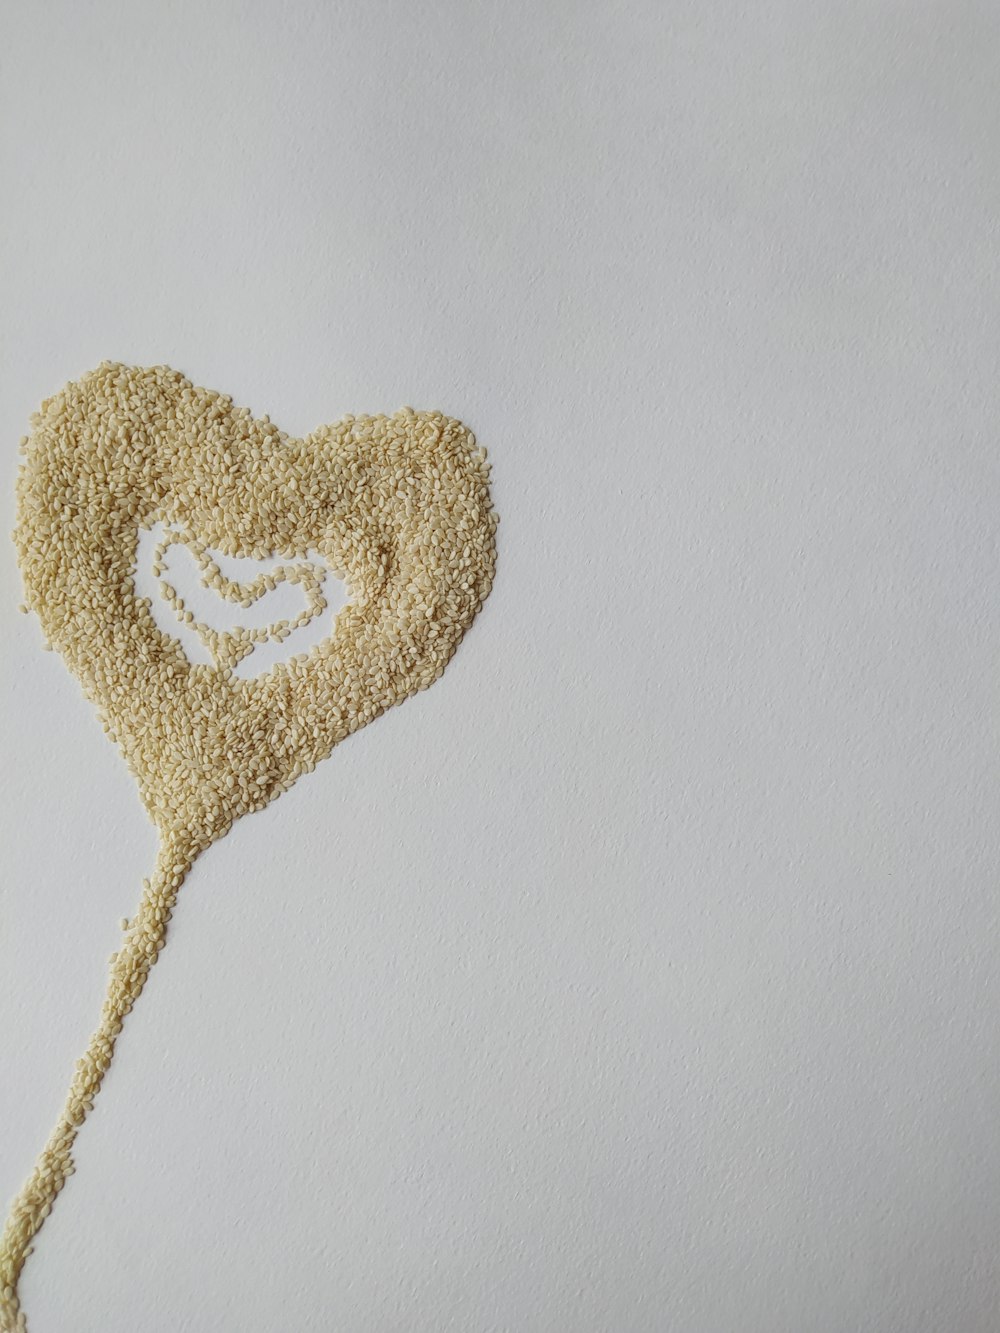 a picture of a heart made out of grains